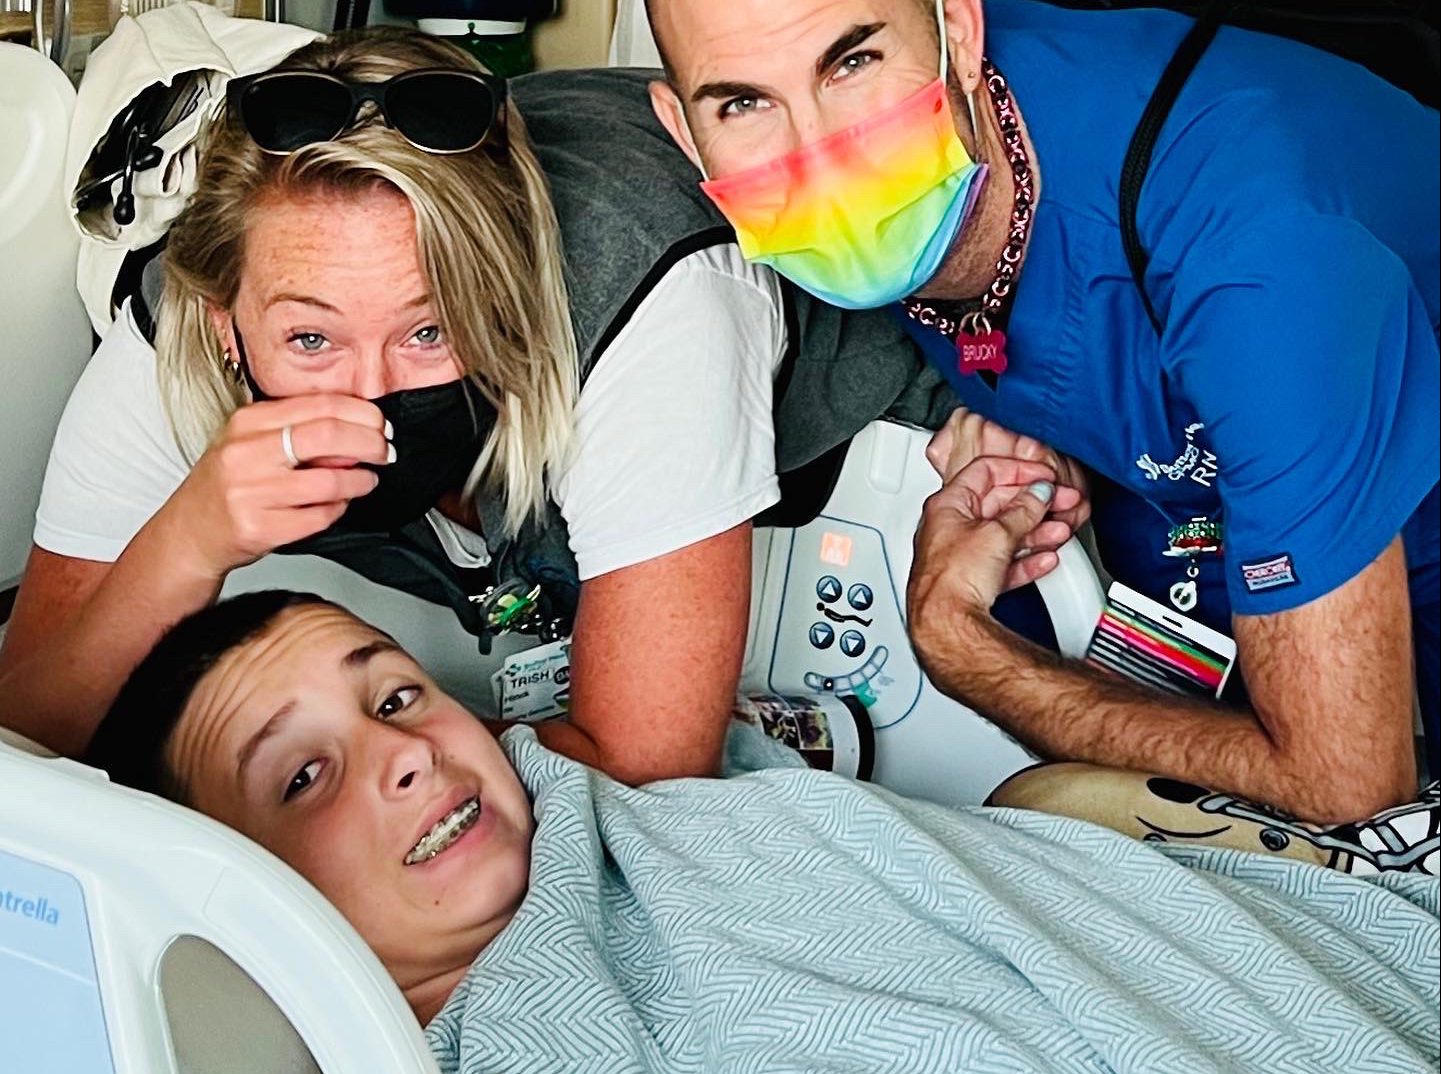 Teenage boy in a hospital bed smiles with is mom and nurse in a tie-dye mask next to him.